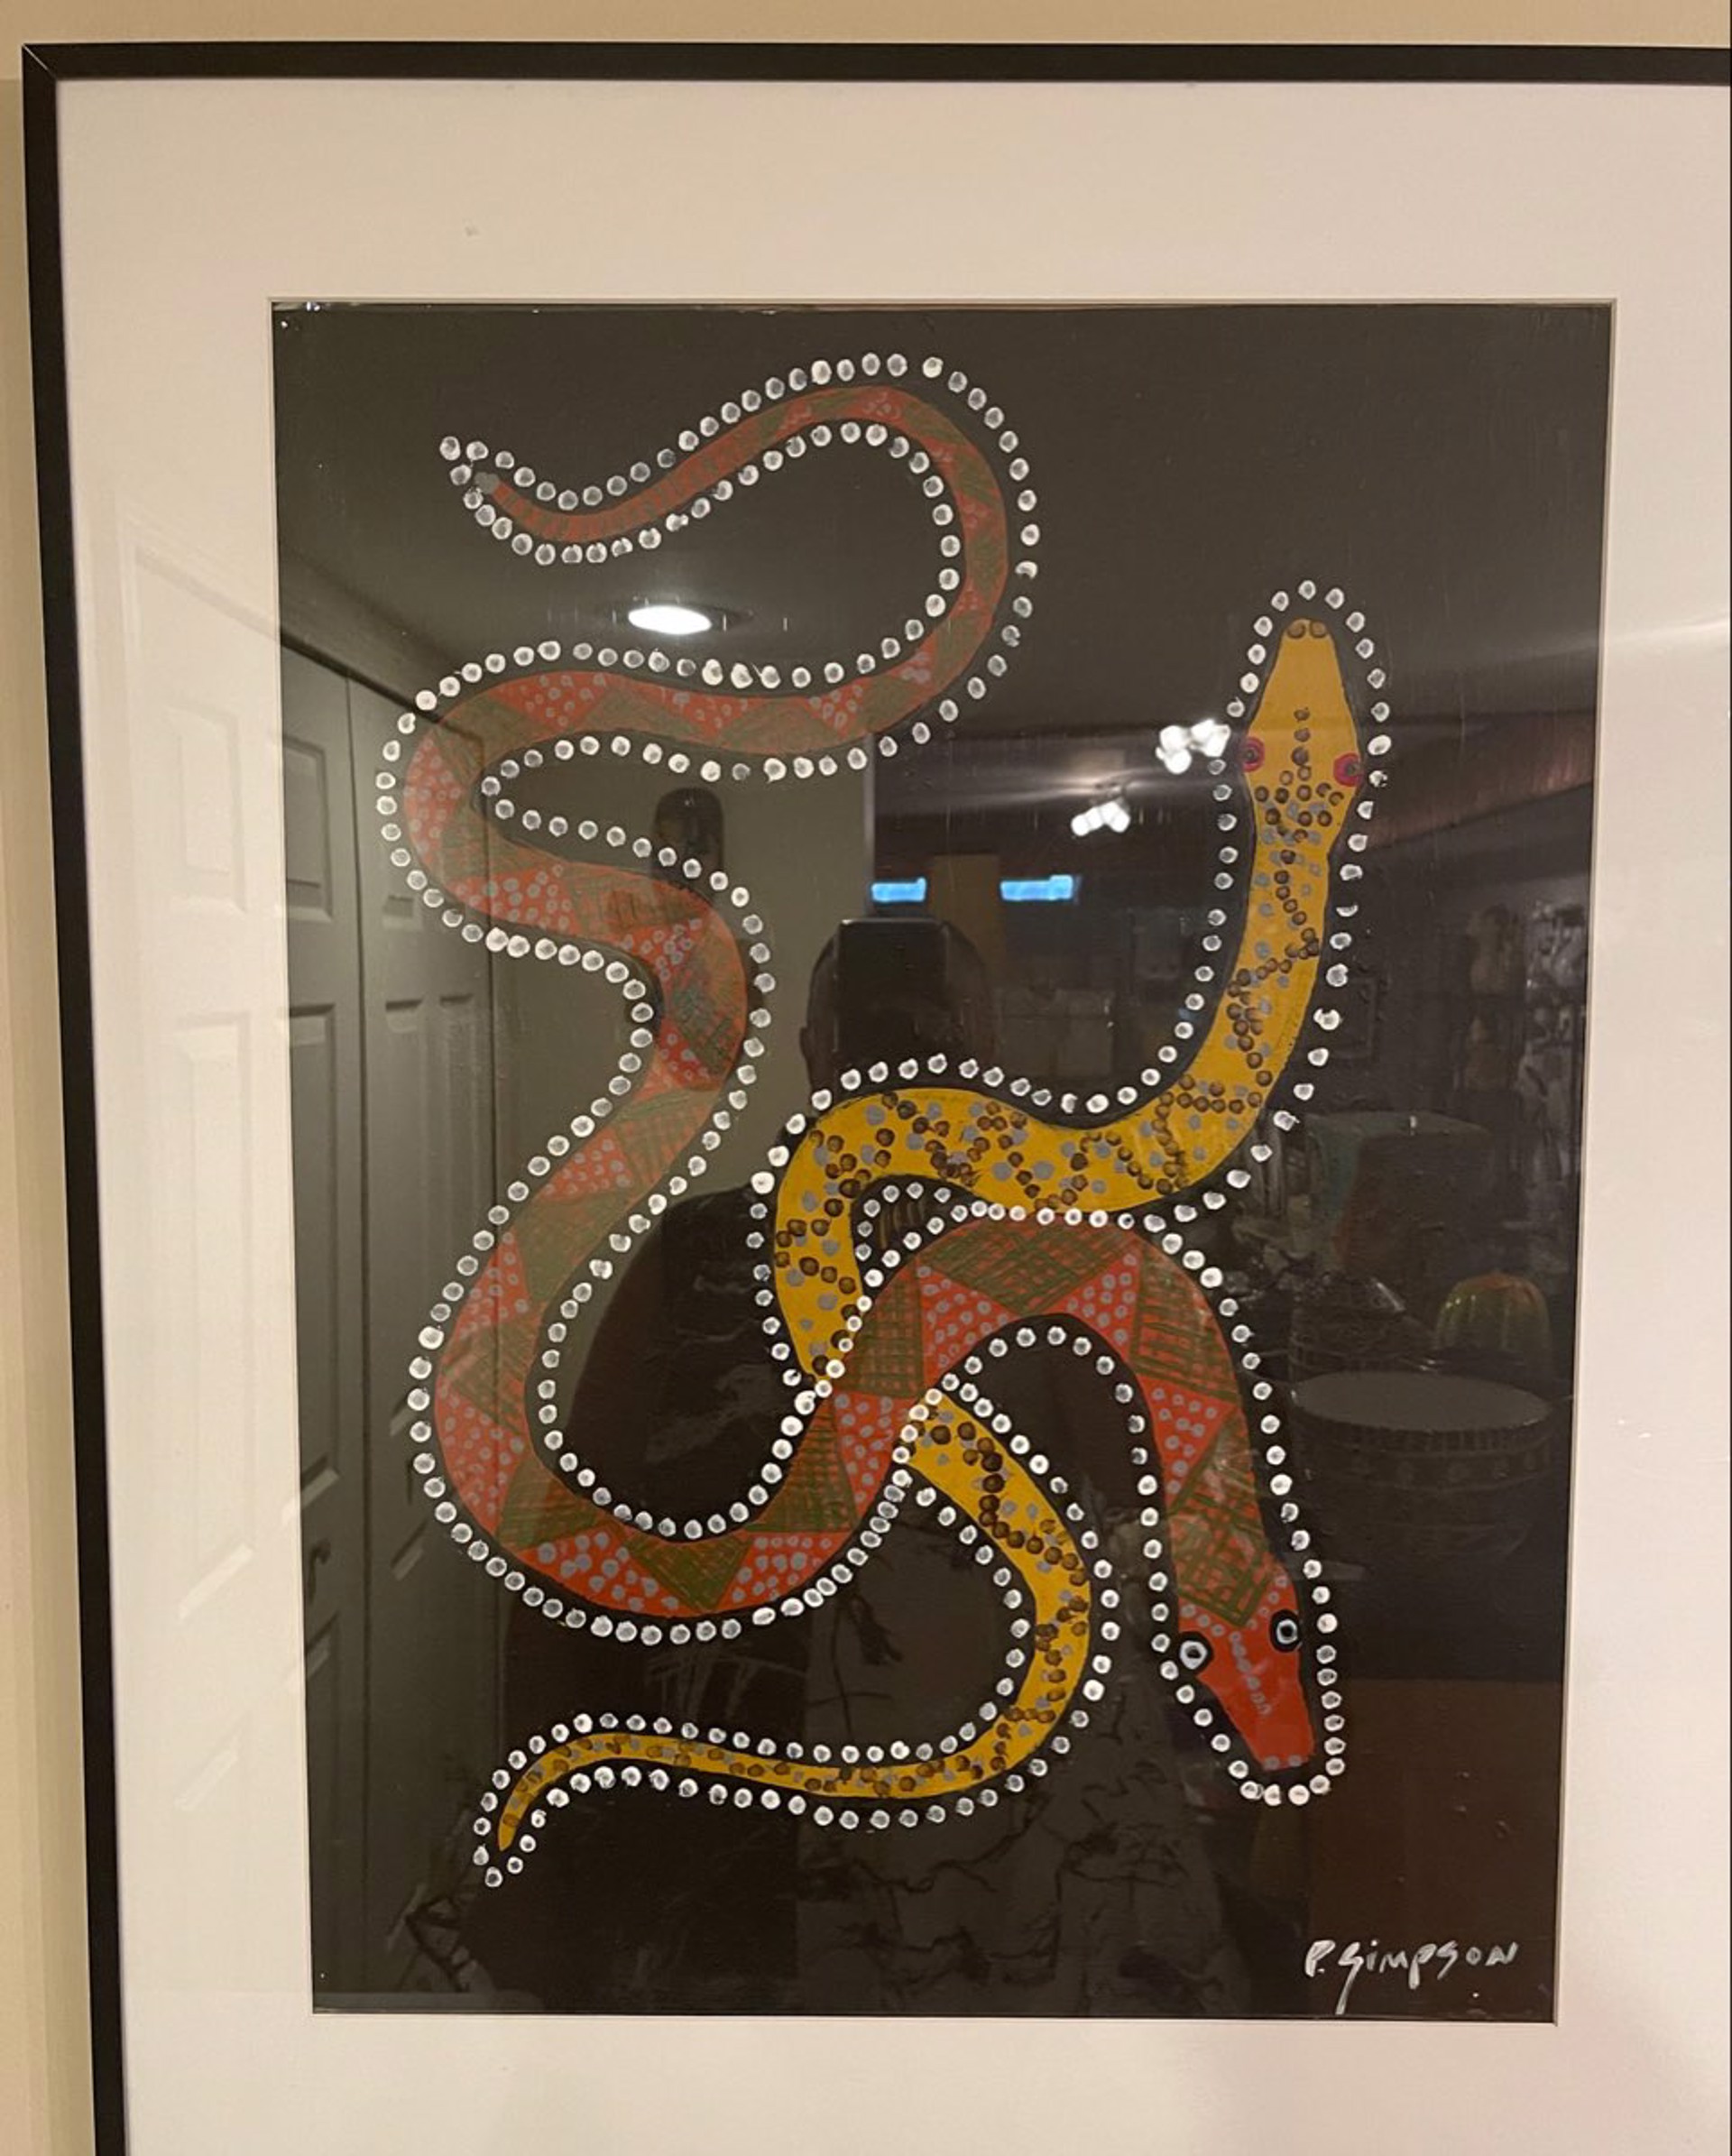 The Snake by Patricia Simpson